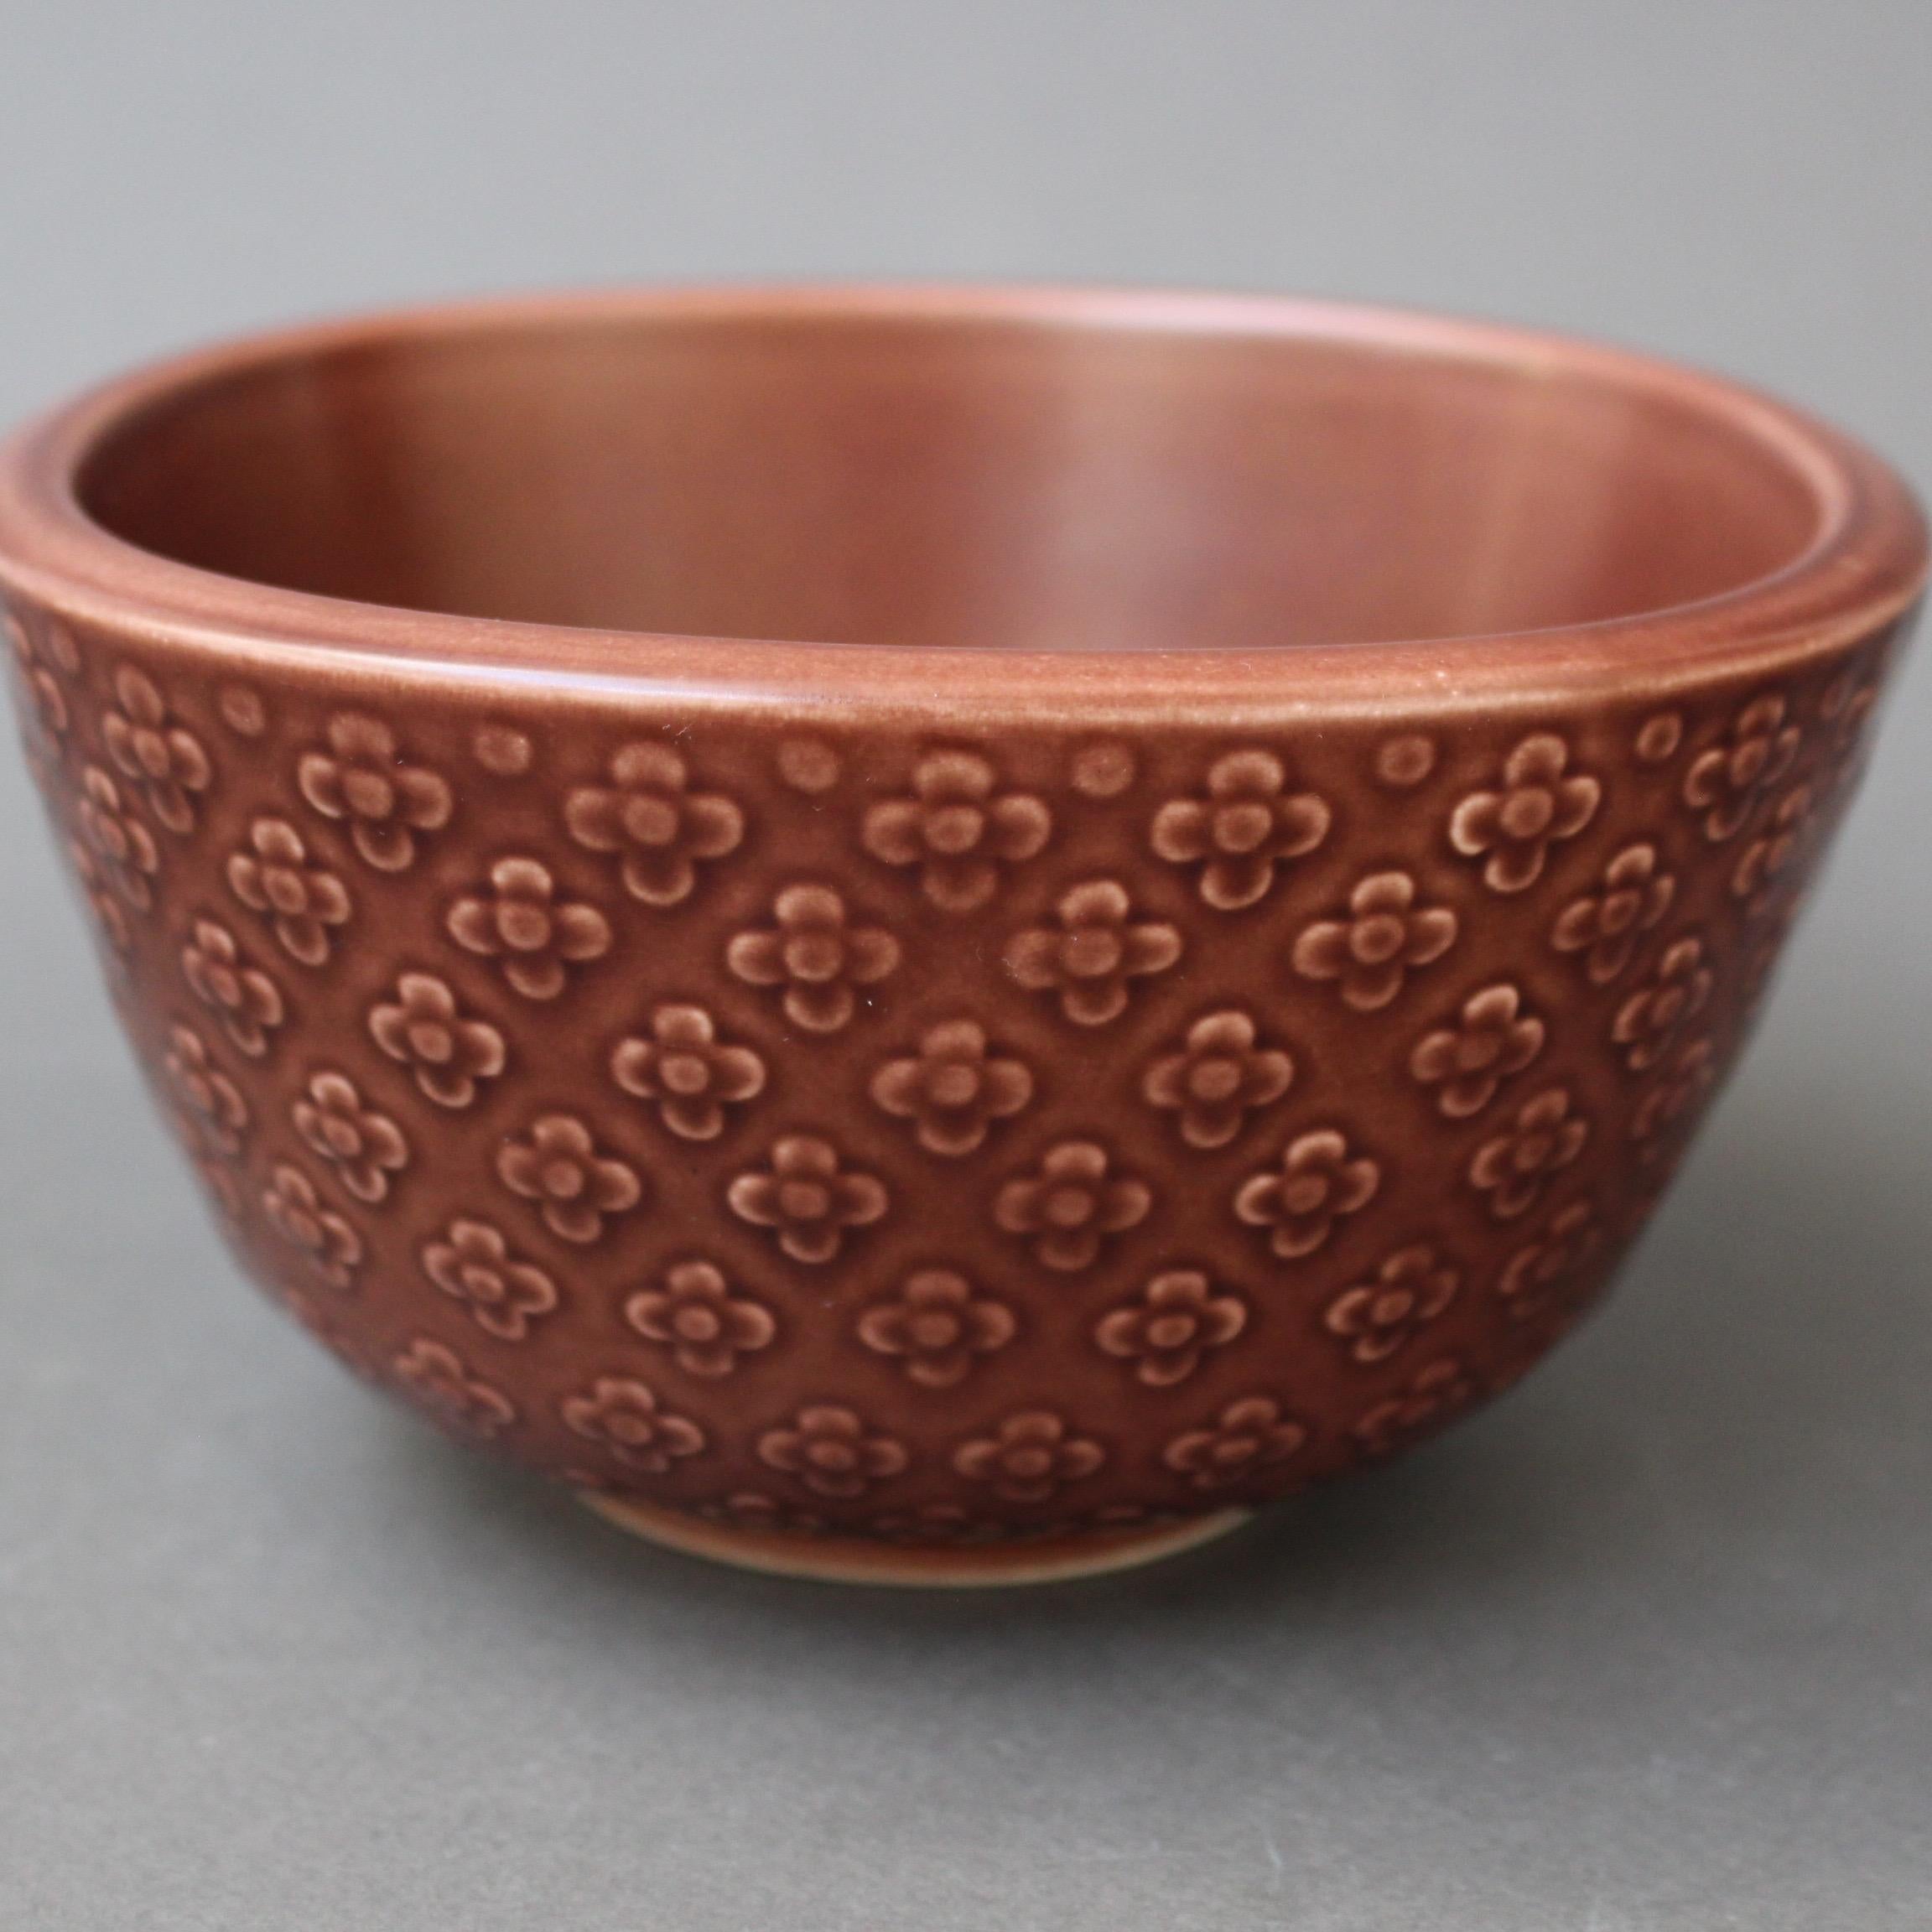 'Marselis' porcelain bowl by Nils Thorsson for Aluminia - Royal Copenhagen (circa 1960s). The bowl has a flower motif in a luscious mahogany brown color, a quintessential example mid-century modernism. In very good vintage condition. Marked: